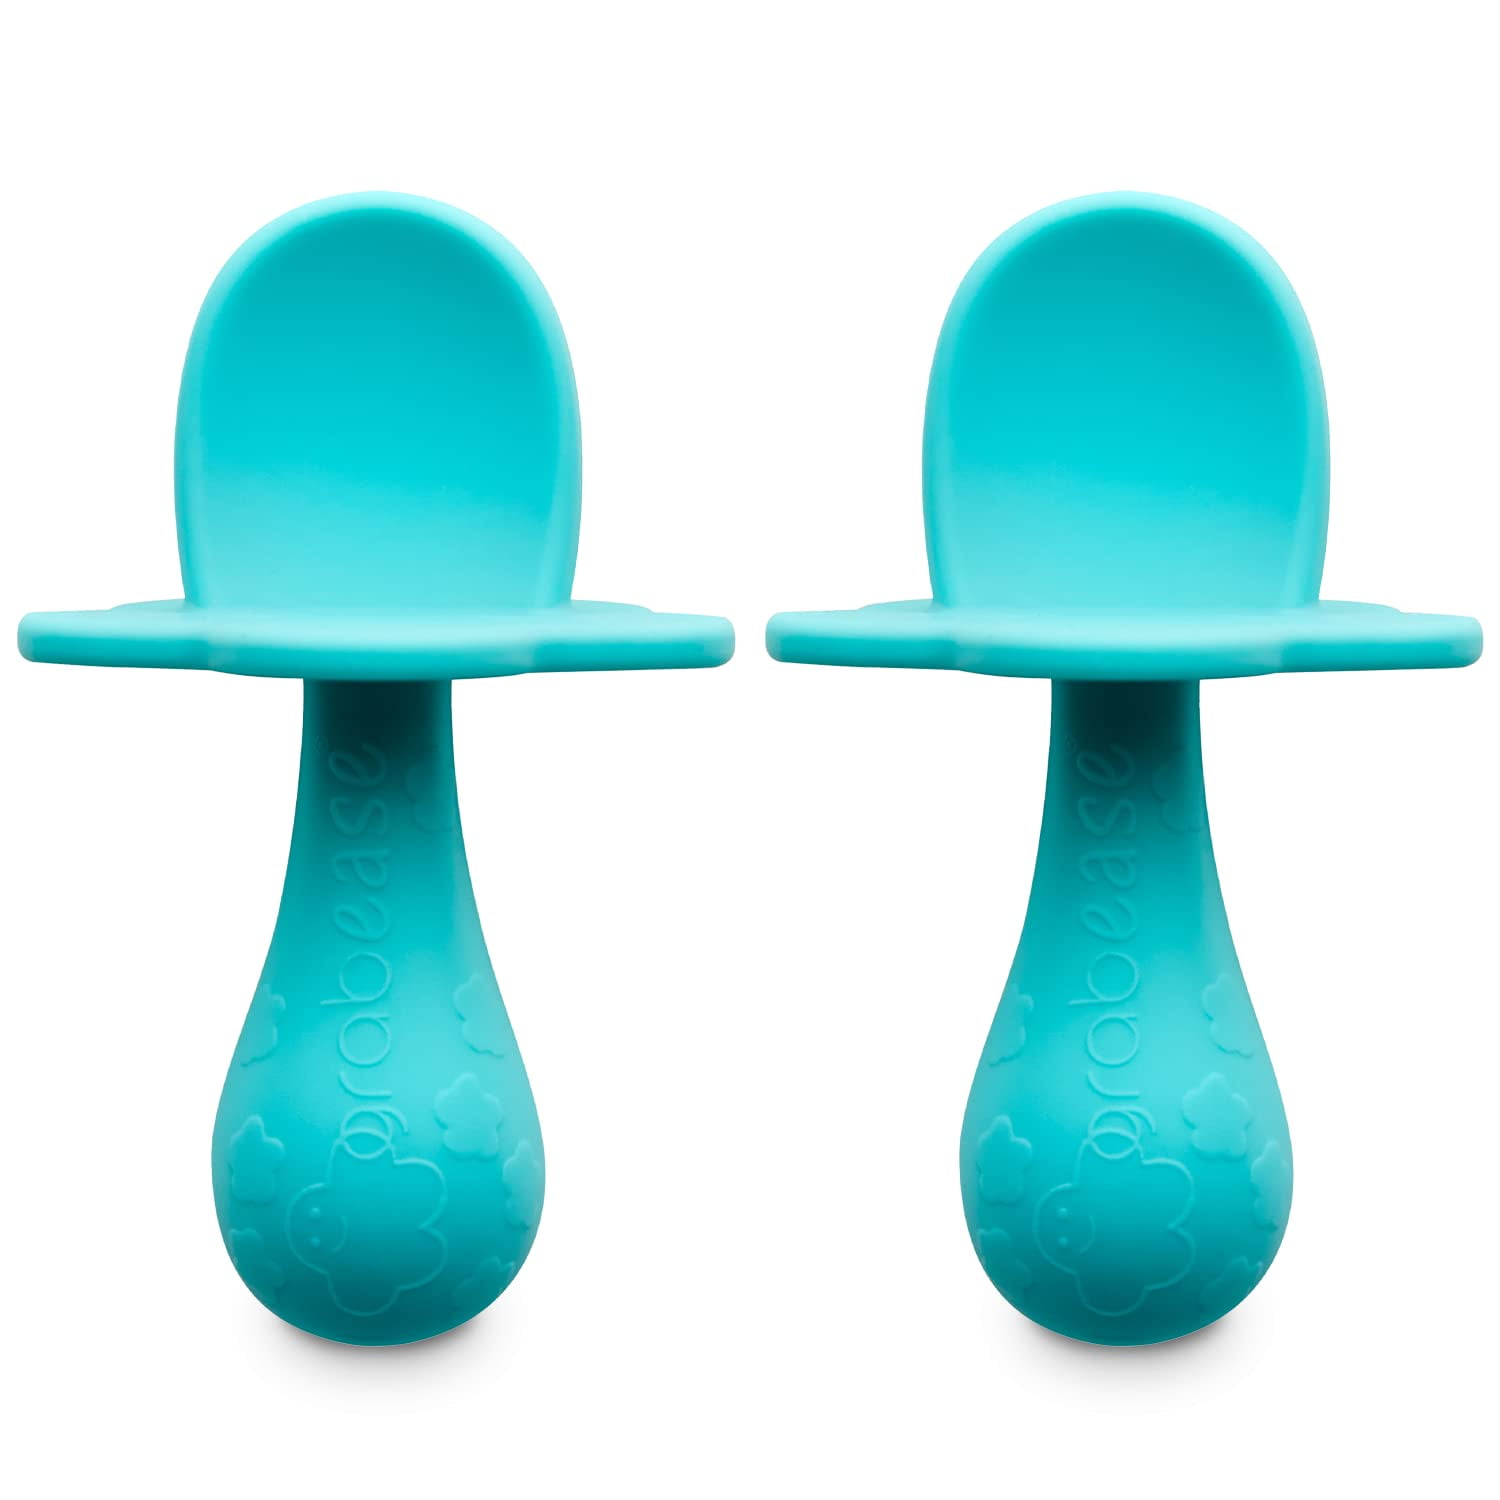 Bulk-buy BPA Free Color Changing Babyske Silicone Baby Spoon for